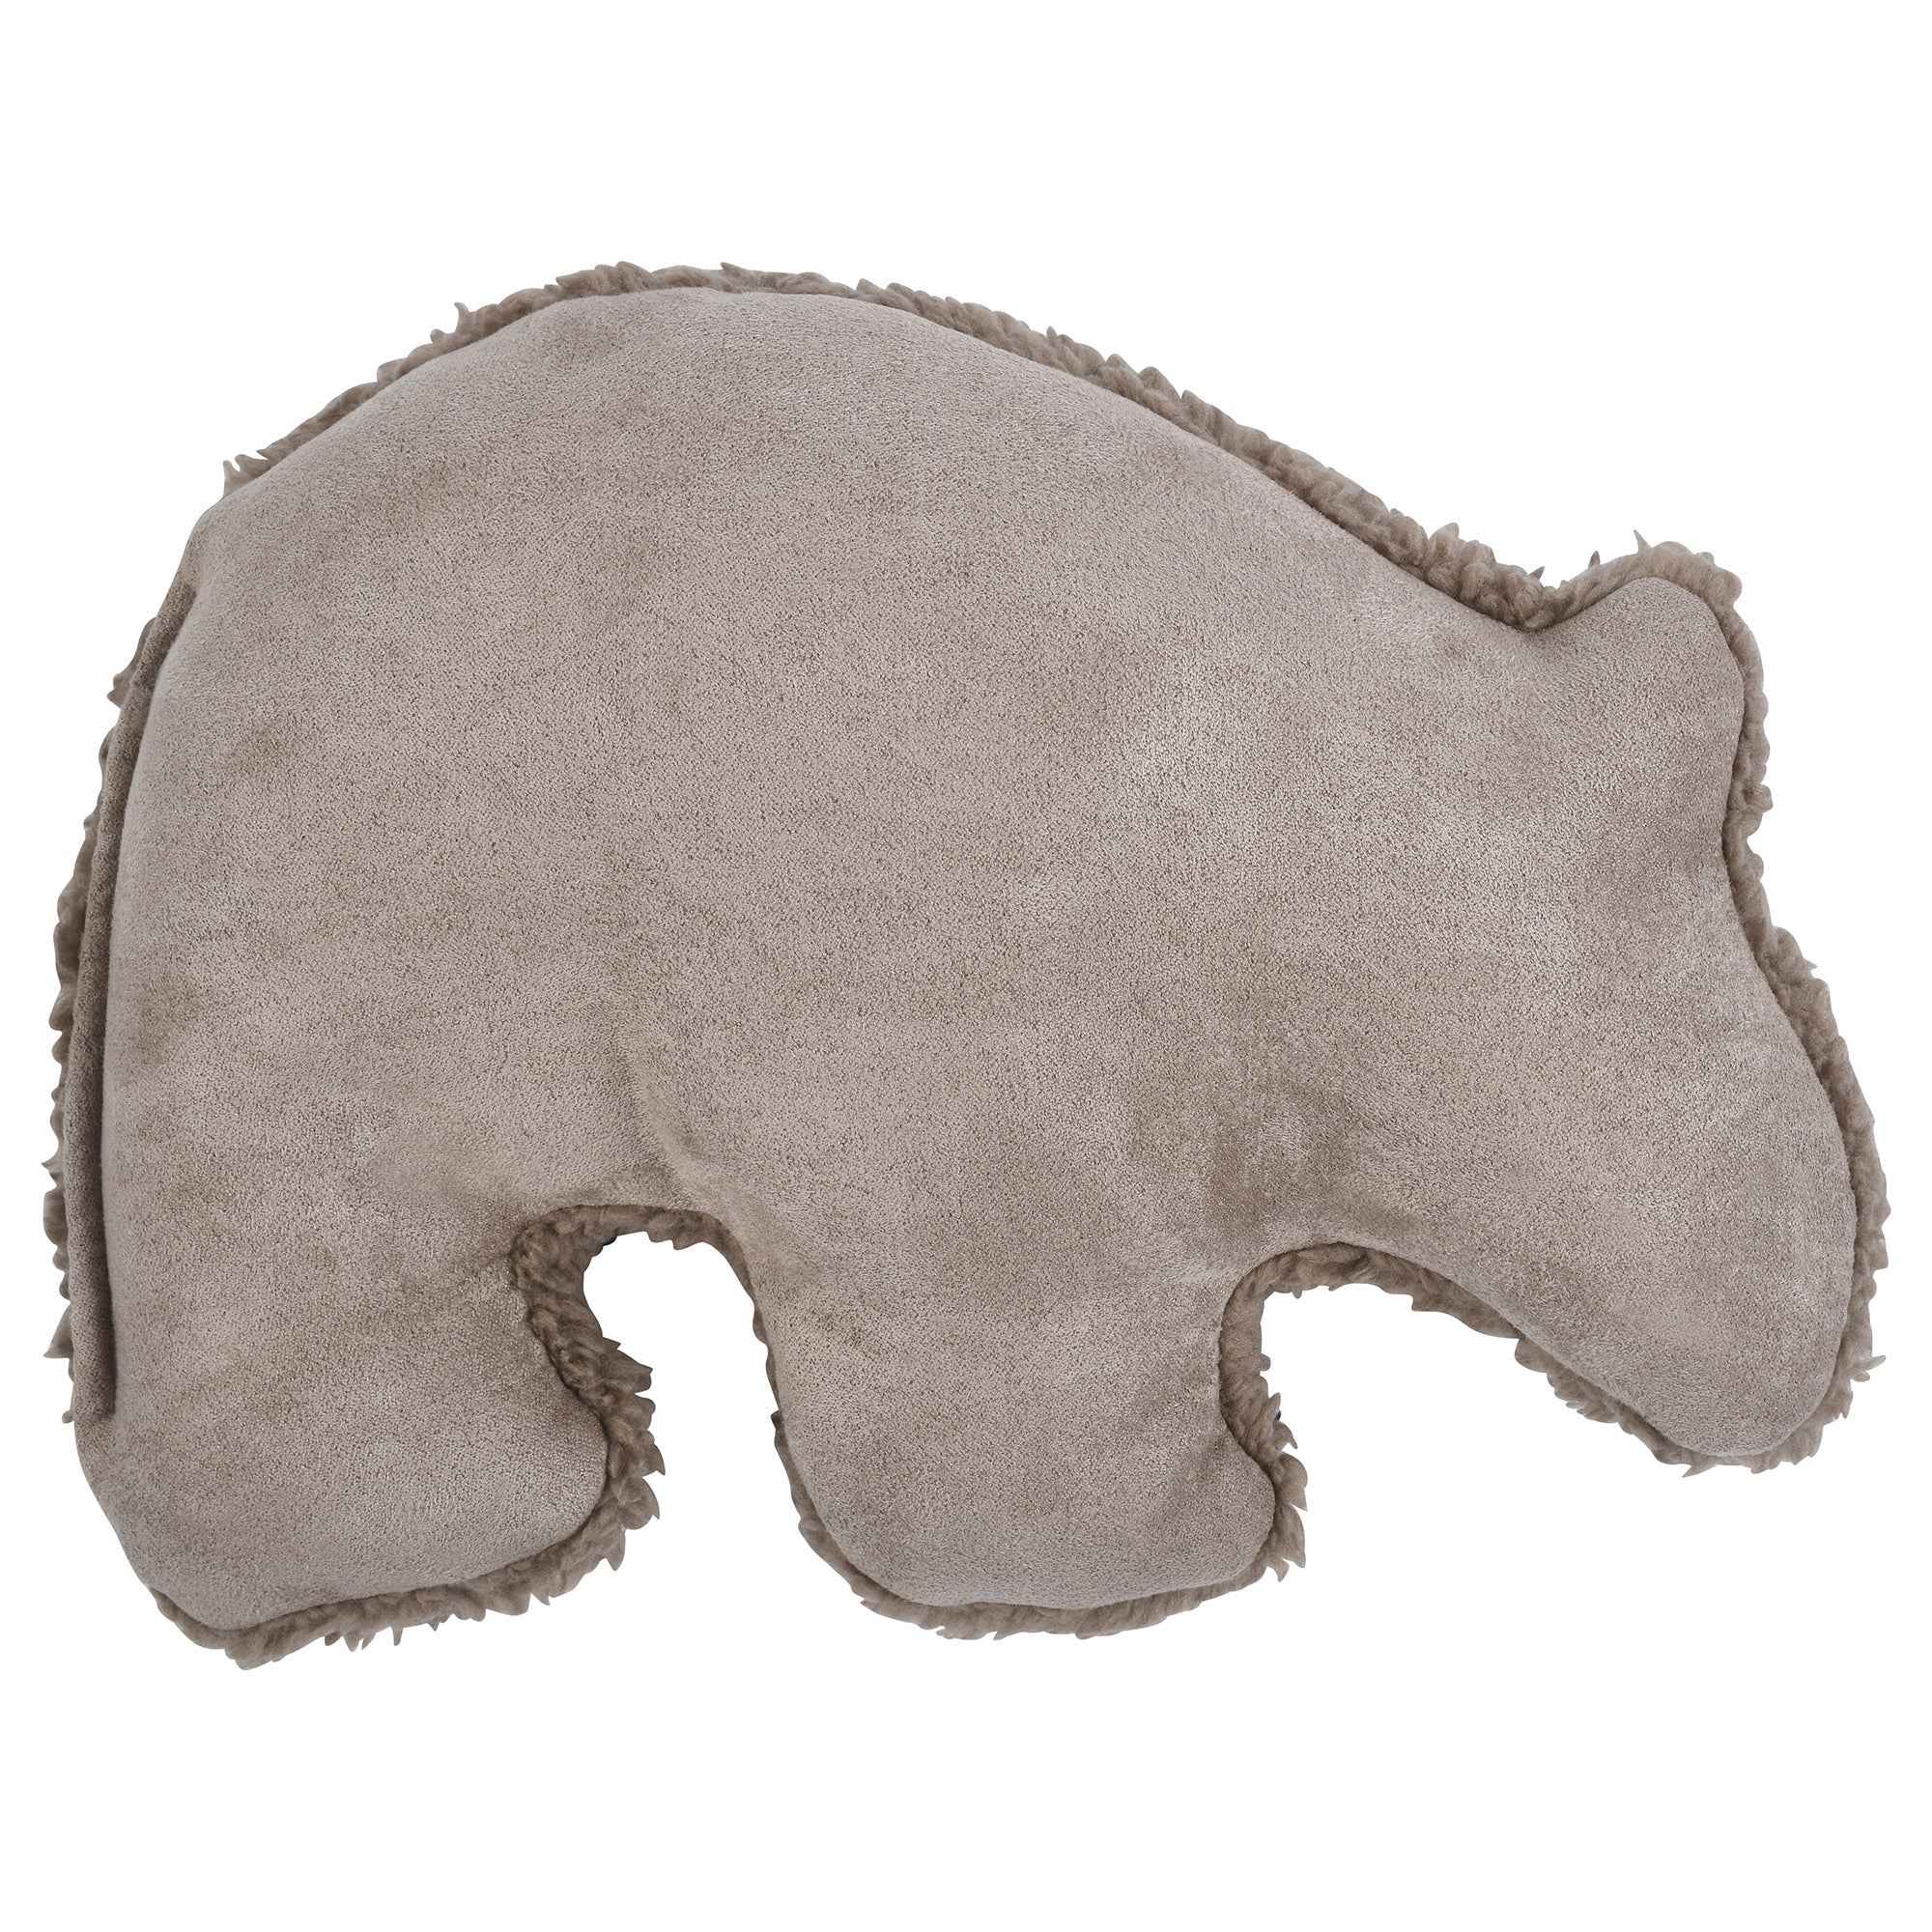 Big Sky Grizzly is sure to delight any dog with its attention-grabbing squeaker and eye-catching colors. Toy is made from faux suede, plush fleece fabric, and stuffed with 100% eco-friendly IntelliLoft fill that is made from recycled plastic bottles.